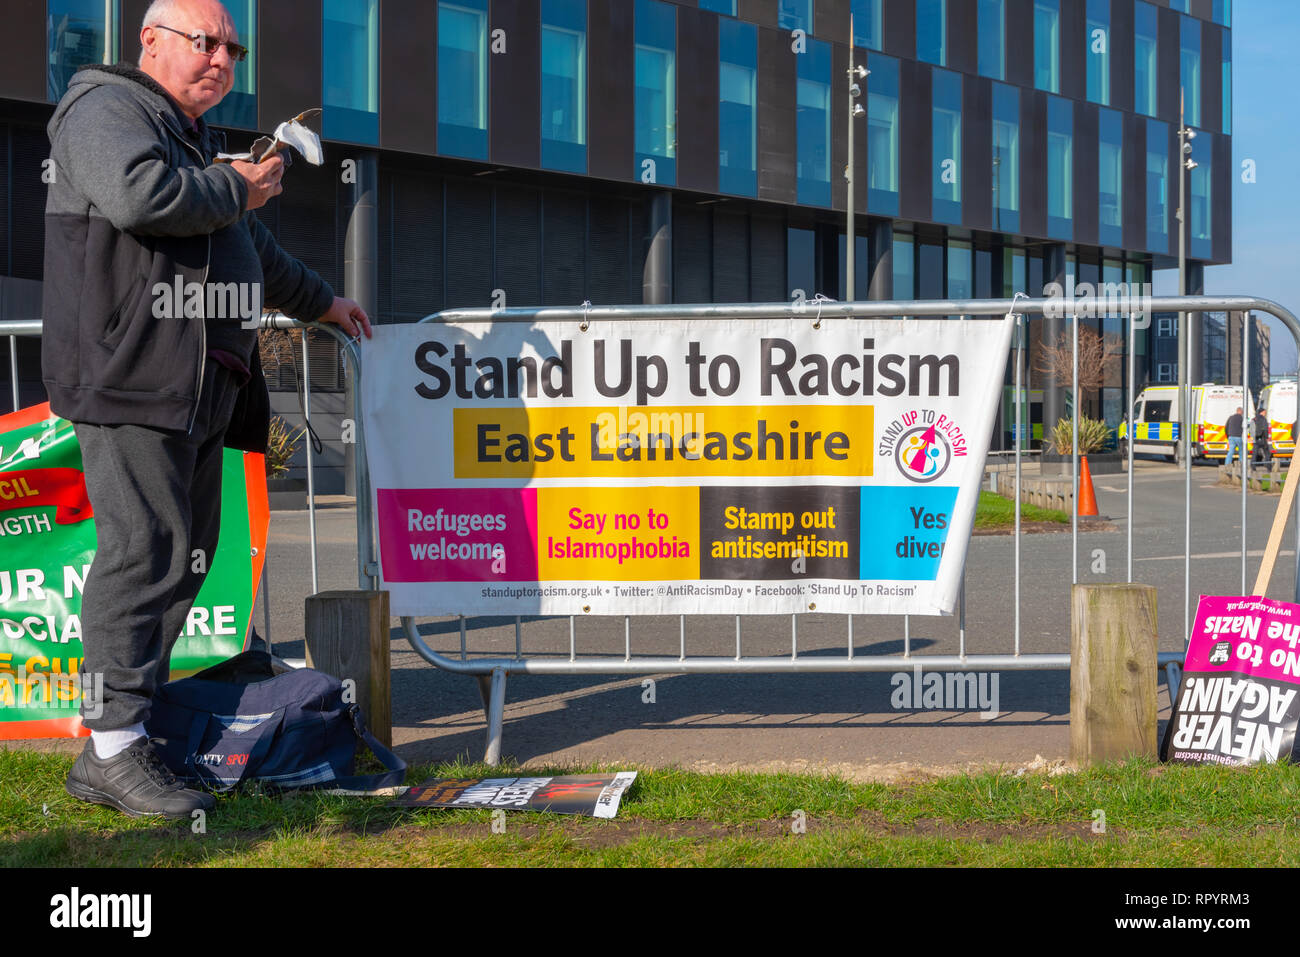 Salford, Greater Manchester, UK. 23rd February, 2019. Anti-fascist protestors are holding a counter rally at MediaCity in Salford against plans by the former leader of the English Defence League to demonstrate against the BBC. Credit: Alvaro Velazquez Gardeta/Alamy Live News Stock Photo